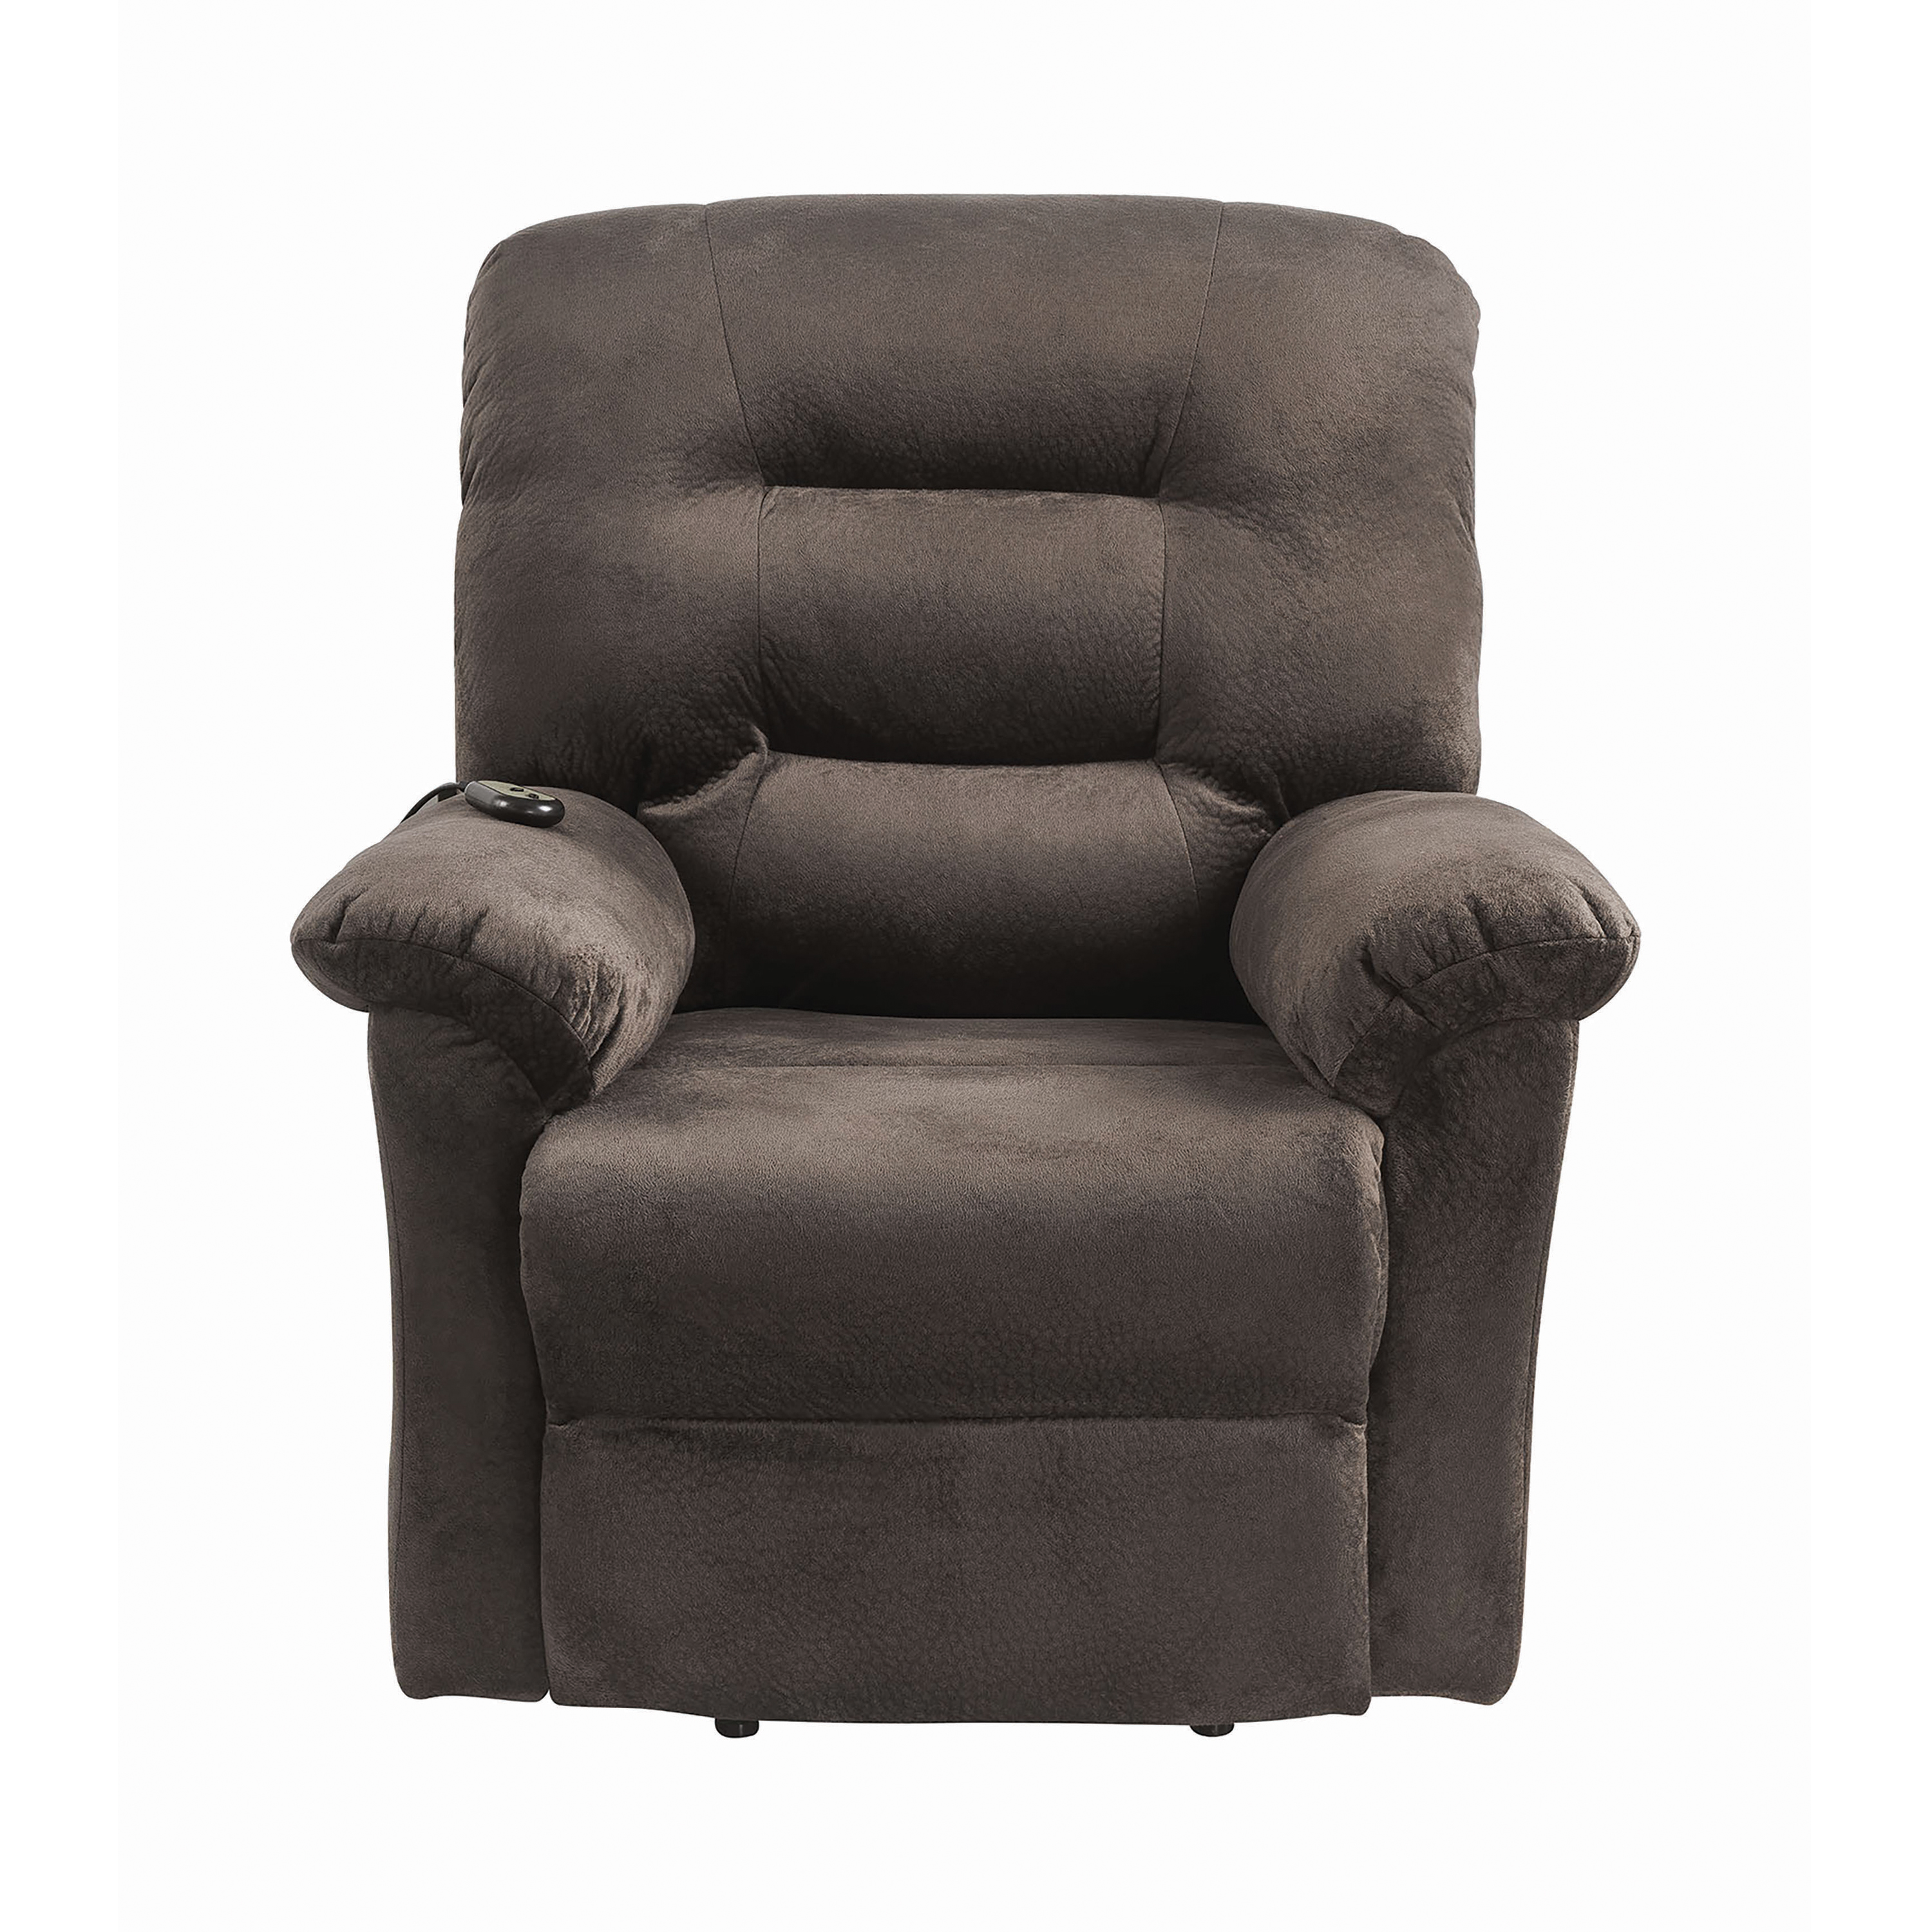 Coaster Company Power Lift Recliner, Chocolate - image 2 of 3